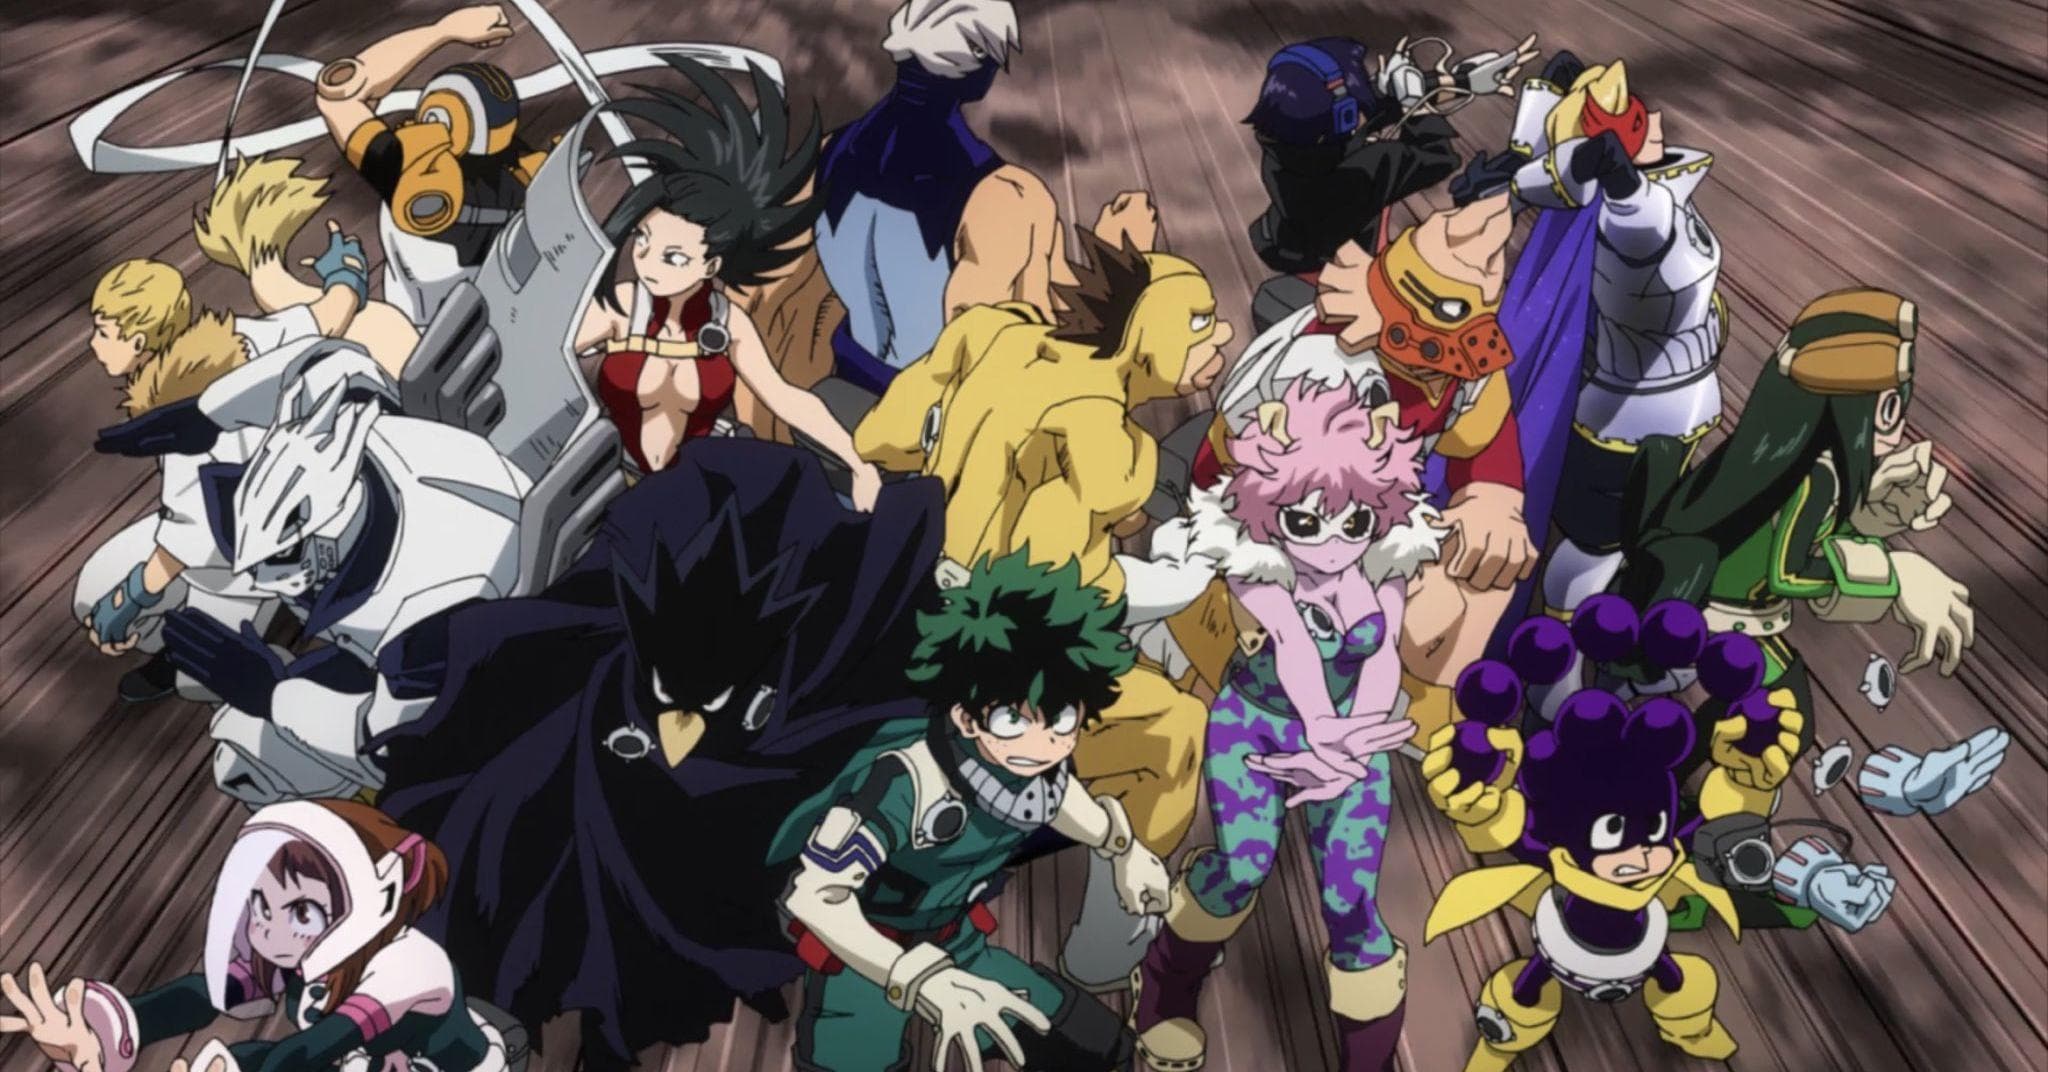 19 Easter Egg References In My Hero Academia